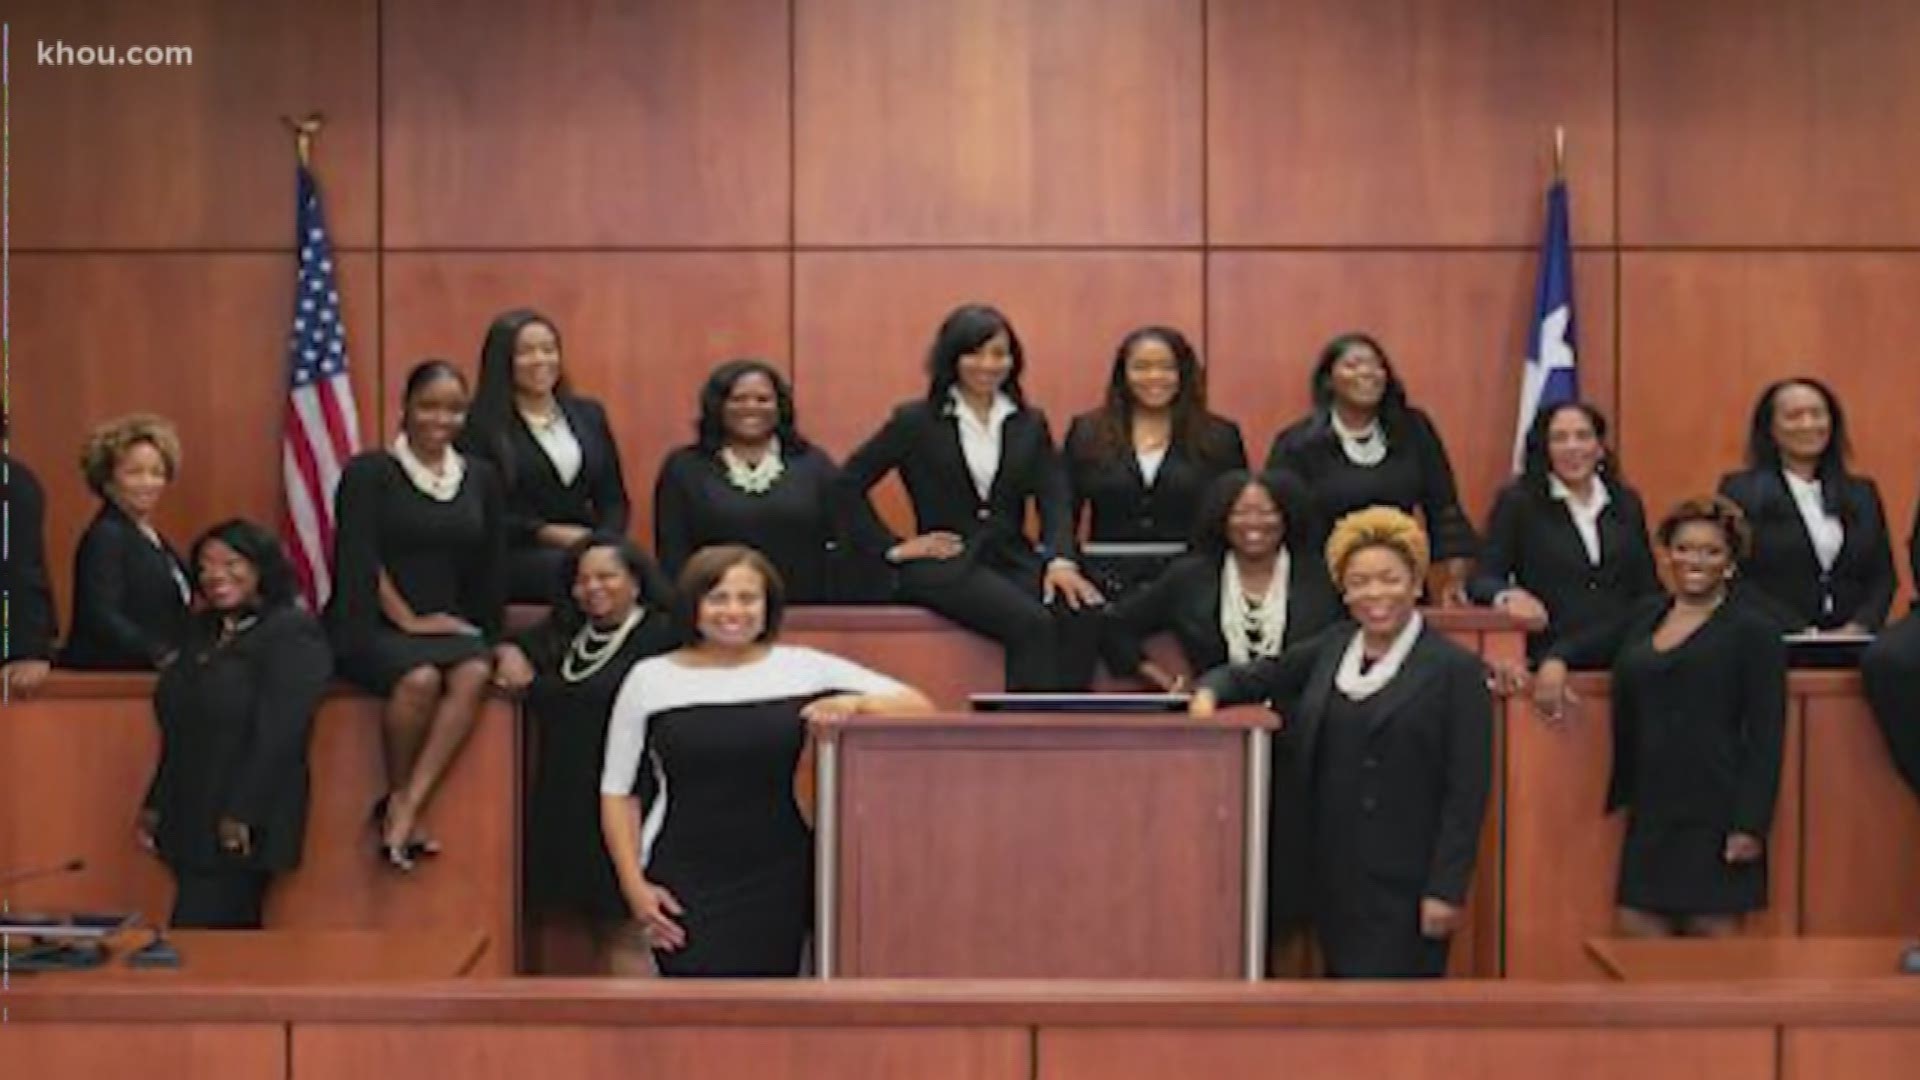 17 African-American women are making history in Harris County when they're sworn in as judges.